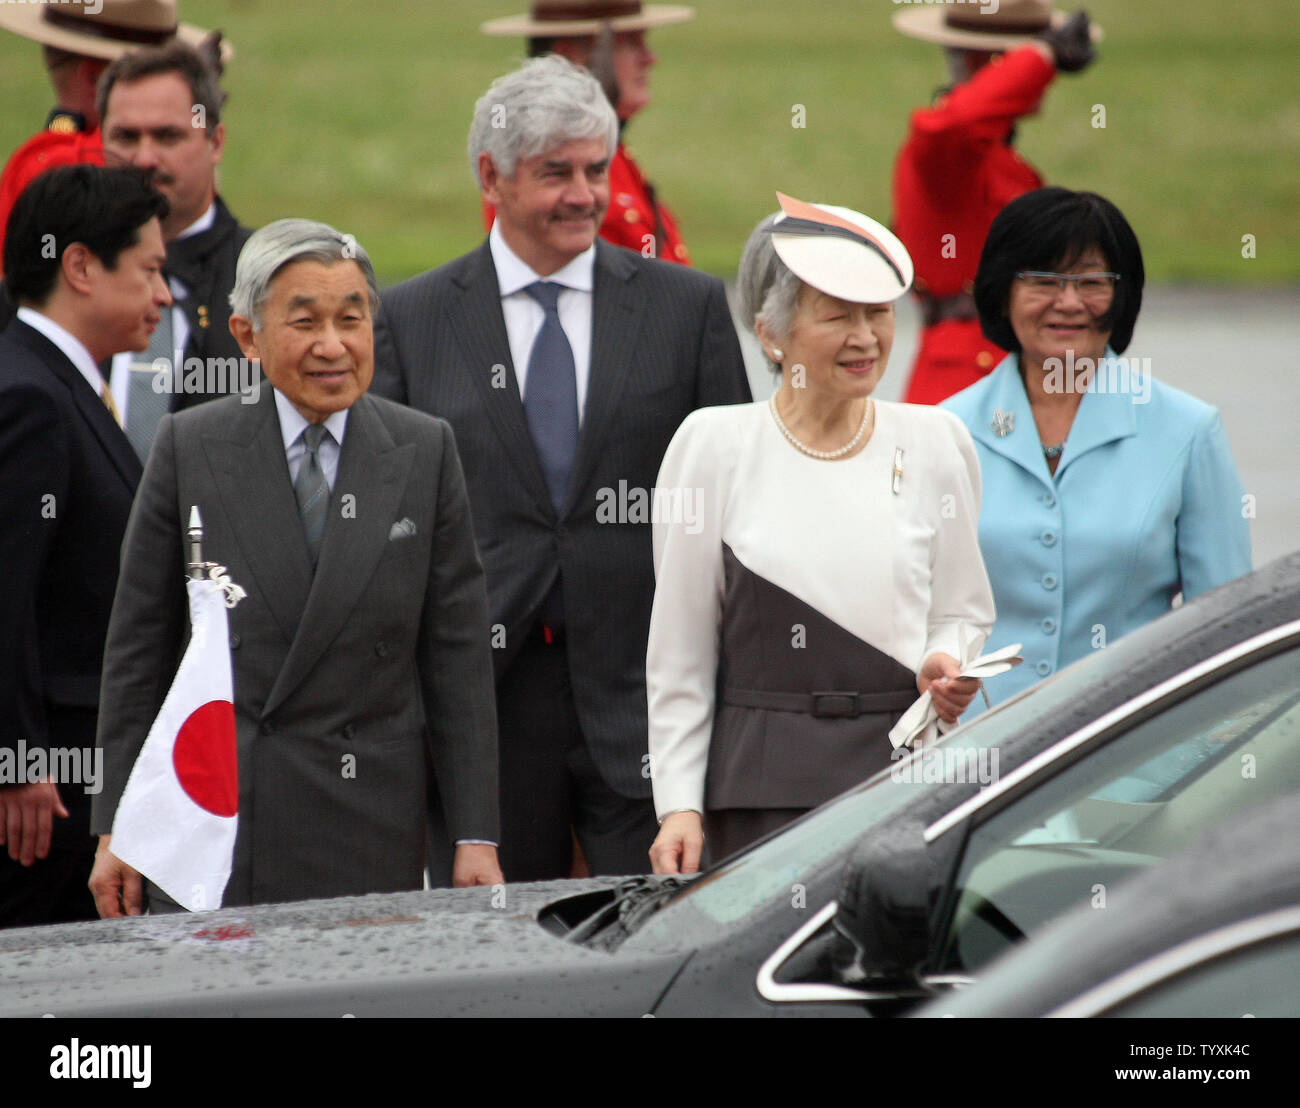 Emperor Akihito and Empress Michiko of Japan arrive at Ottawa International Airport on July 3, 2009. The Imperial Couple is visiting Canada to mark the 80th anniversary of diplomatic relations between Canada and Japan. (UPI Photo: Grace Chiu) Stock Photo